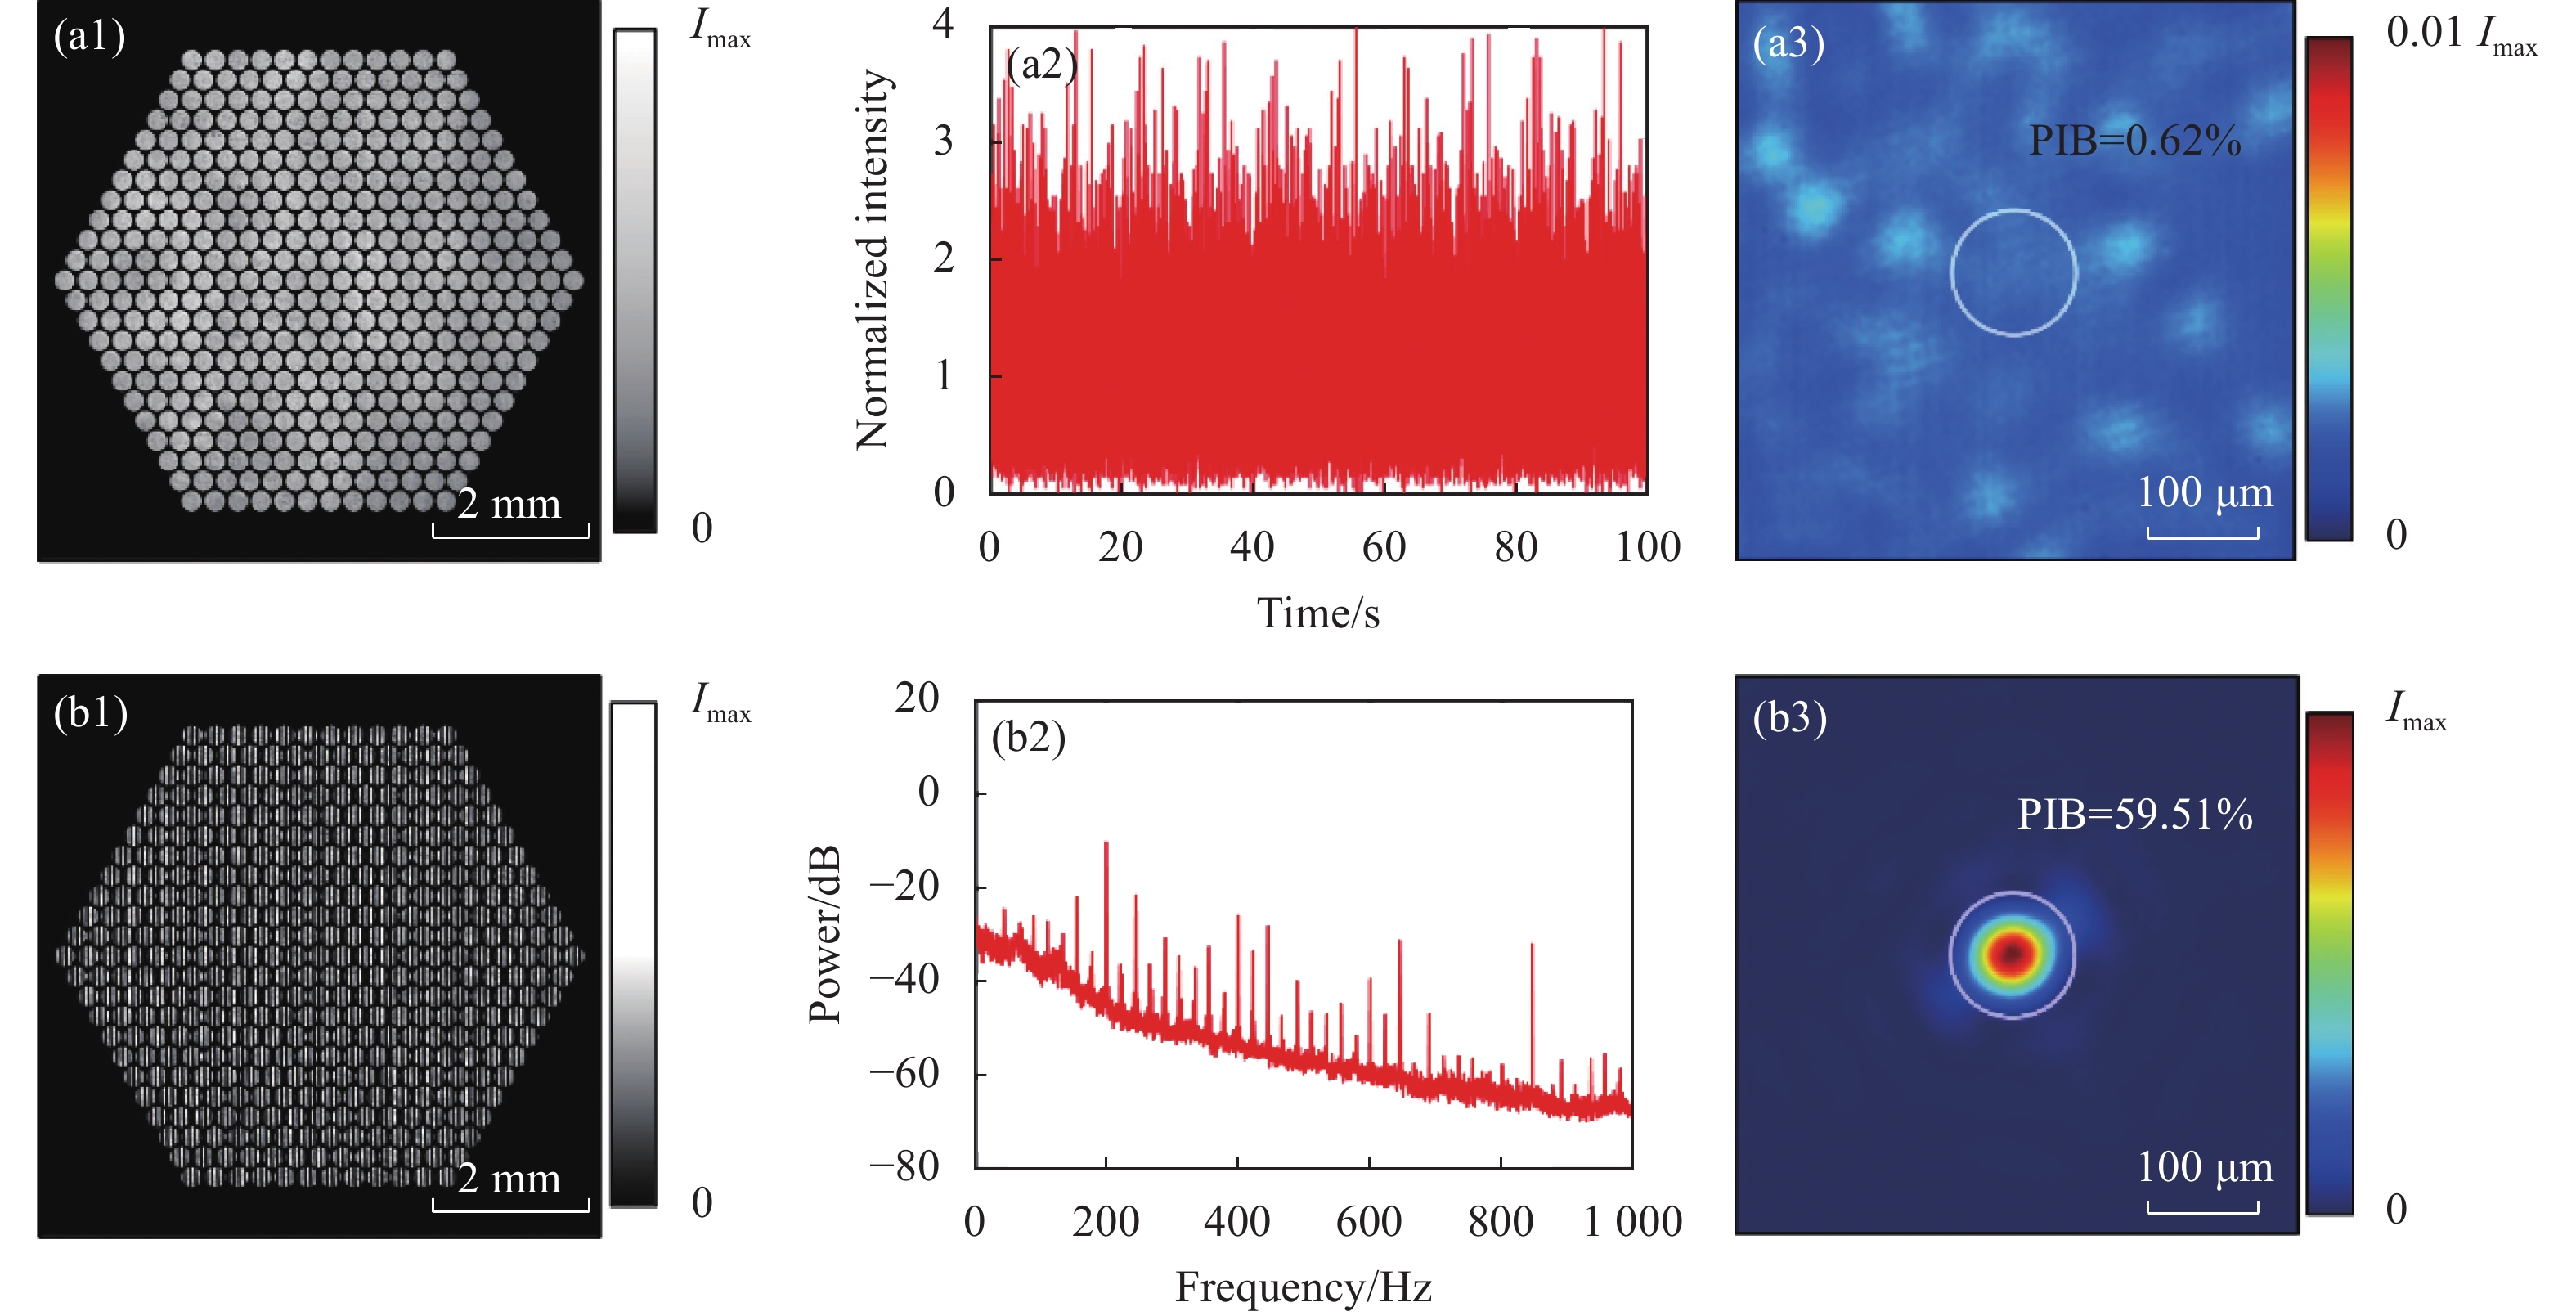 Experimental results. (a1) The intensity profile of the laser array; (a2) The time-domain distribution of the light intensity inside the pin-hole in the open-loop state; (a3) The zoomed long exposure image in the open-loop state; (b1) The intensity profile of interference fringes; (b2) The spectrogram of light intensity inside the pin-hole in the open-loop state; (b3) The zoomed long exposure image in the close-loop state